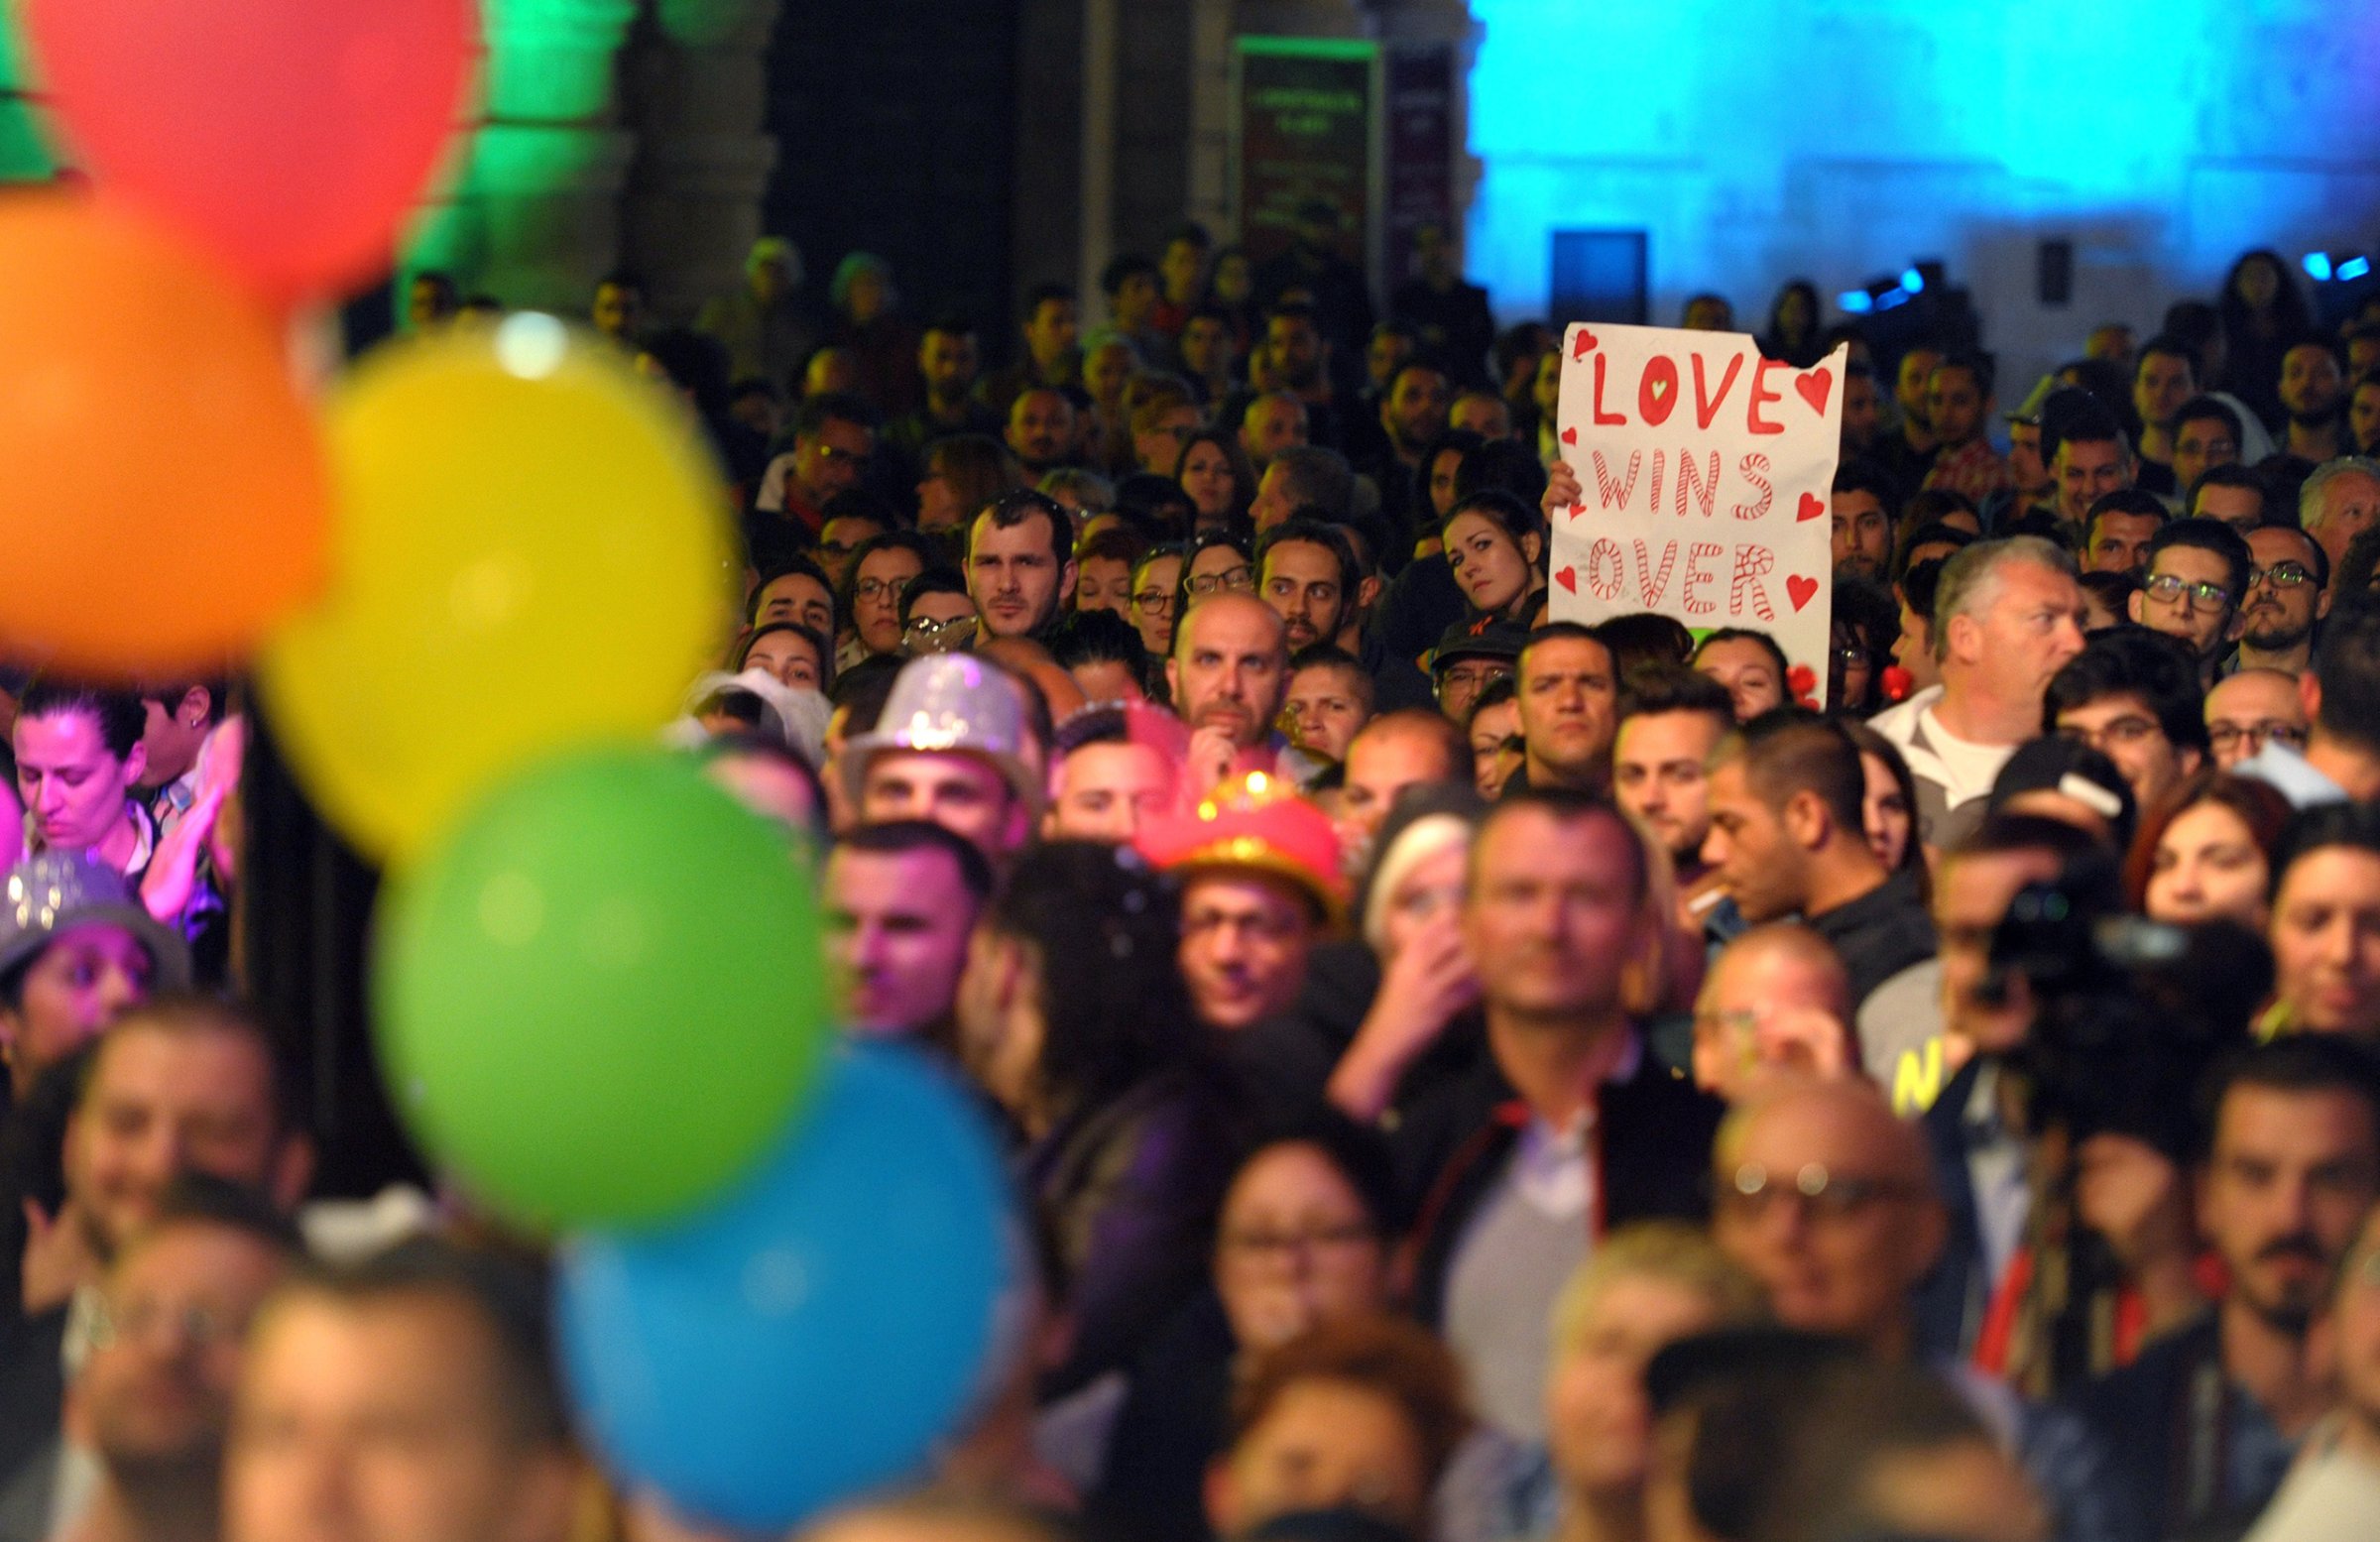 People gather to celebrate in Saint George's Square after the Maltese parliament approved a civil unions bill in Valletta on April 14, 2014. Malta's parliament approved the bill that grants marriage rights to homosexual couples, including the possibility to adopt children.